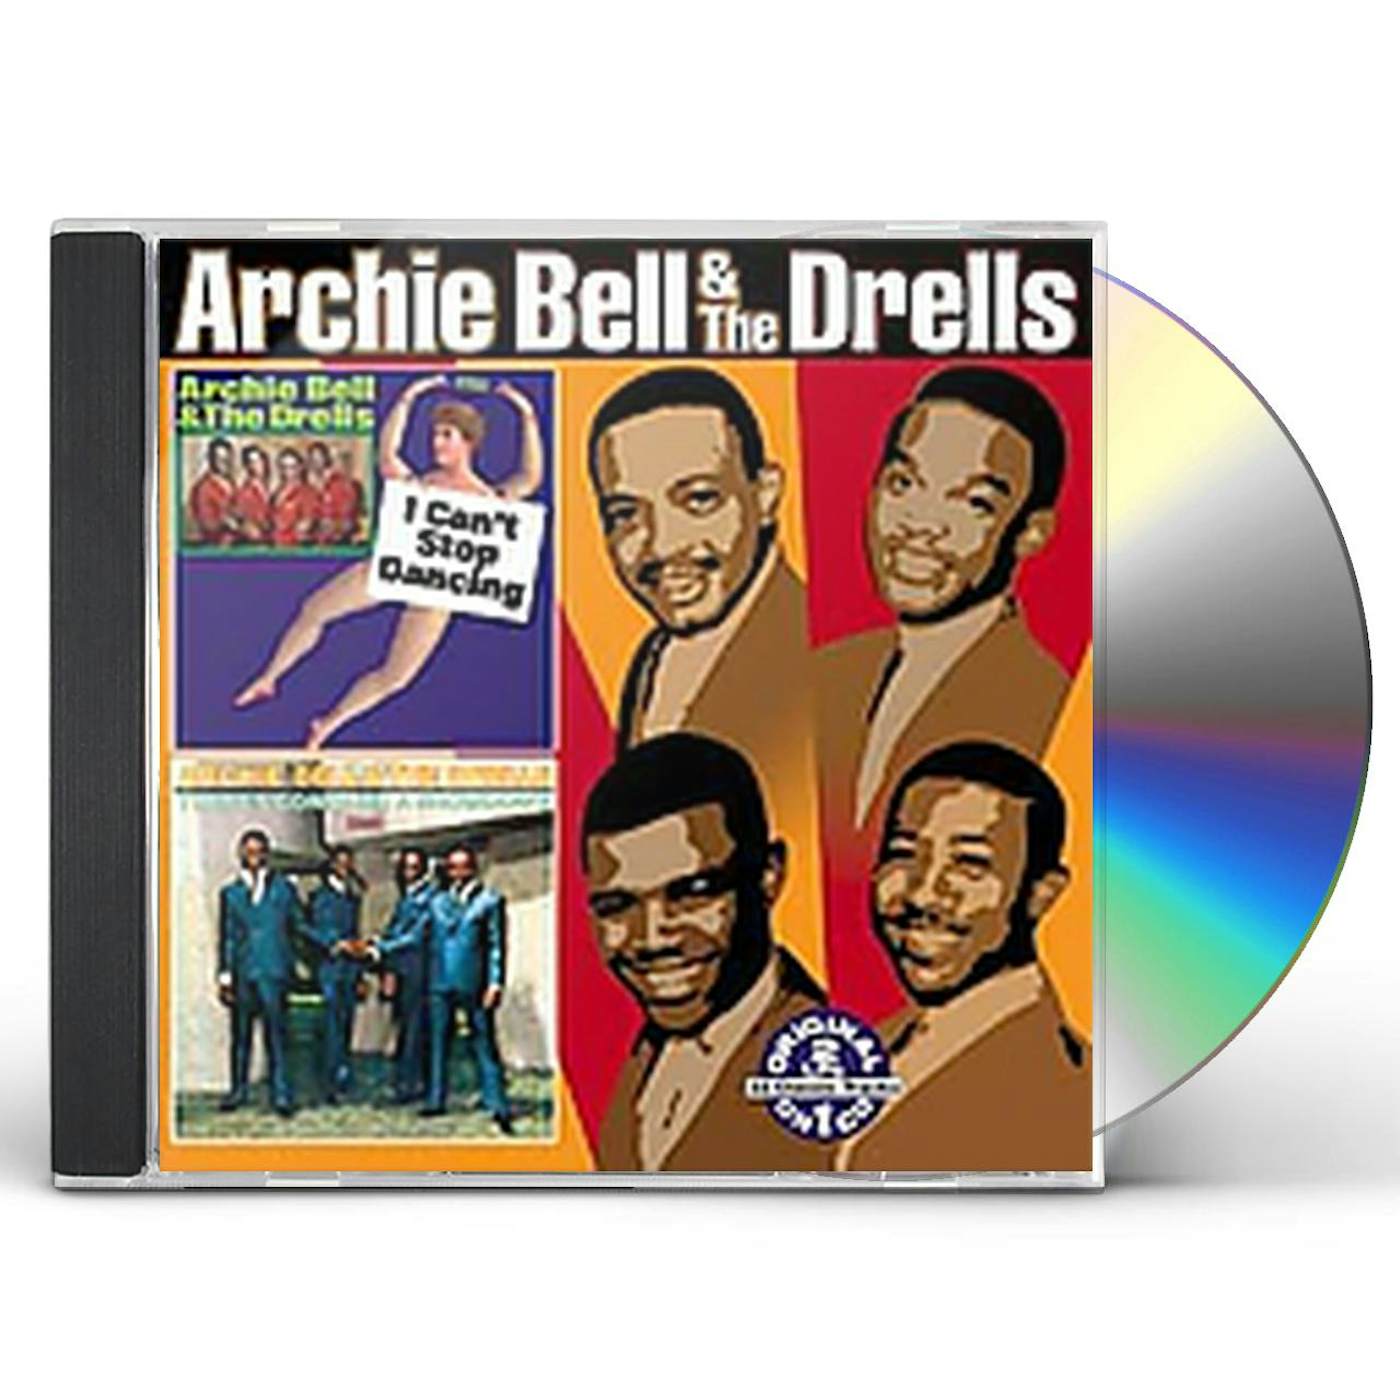 Archie Bell & The Drells I CAN'T STOP DANCING: THERE'S GONNA BE A SHOWDOWN CD